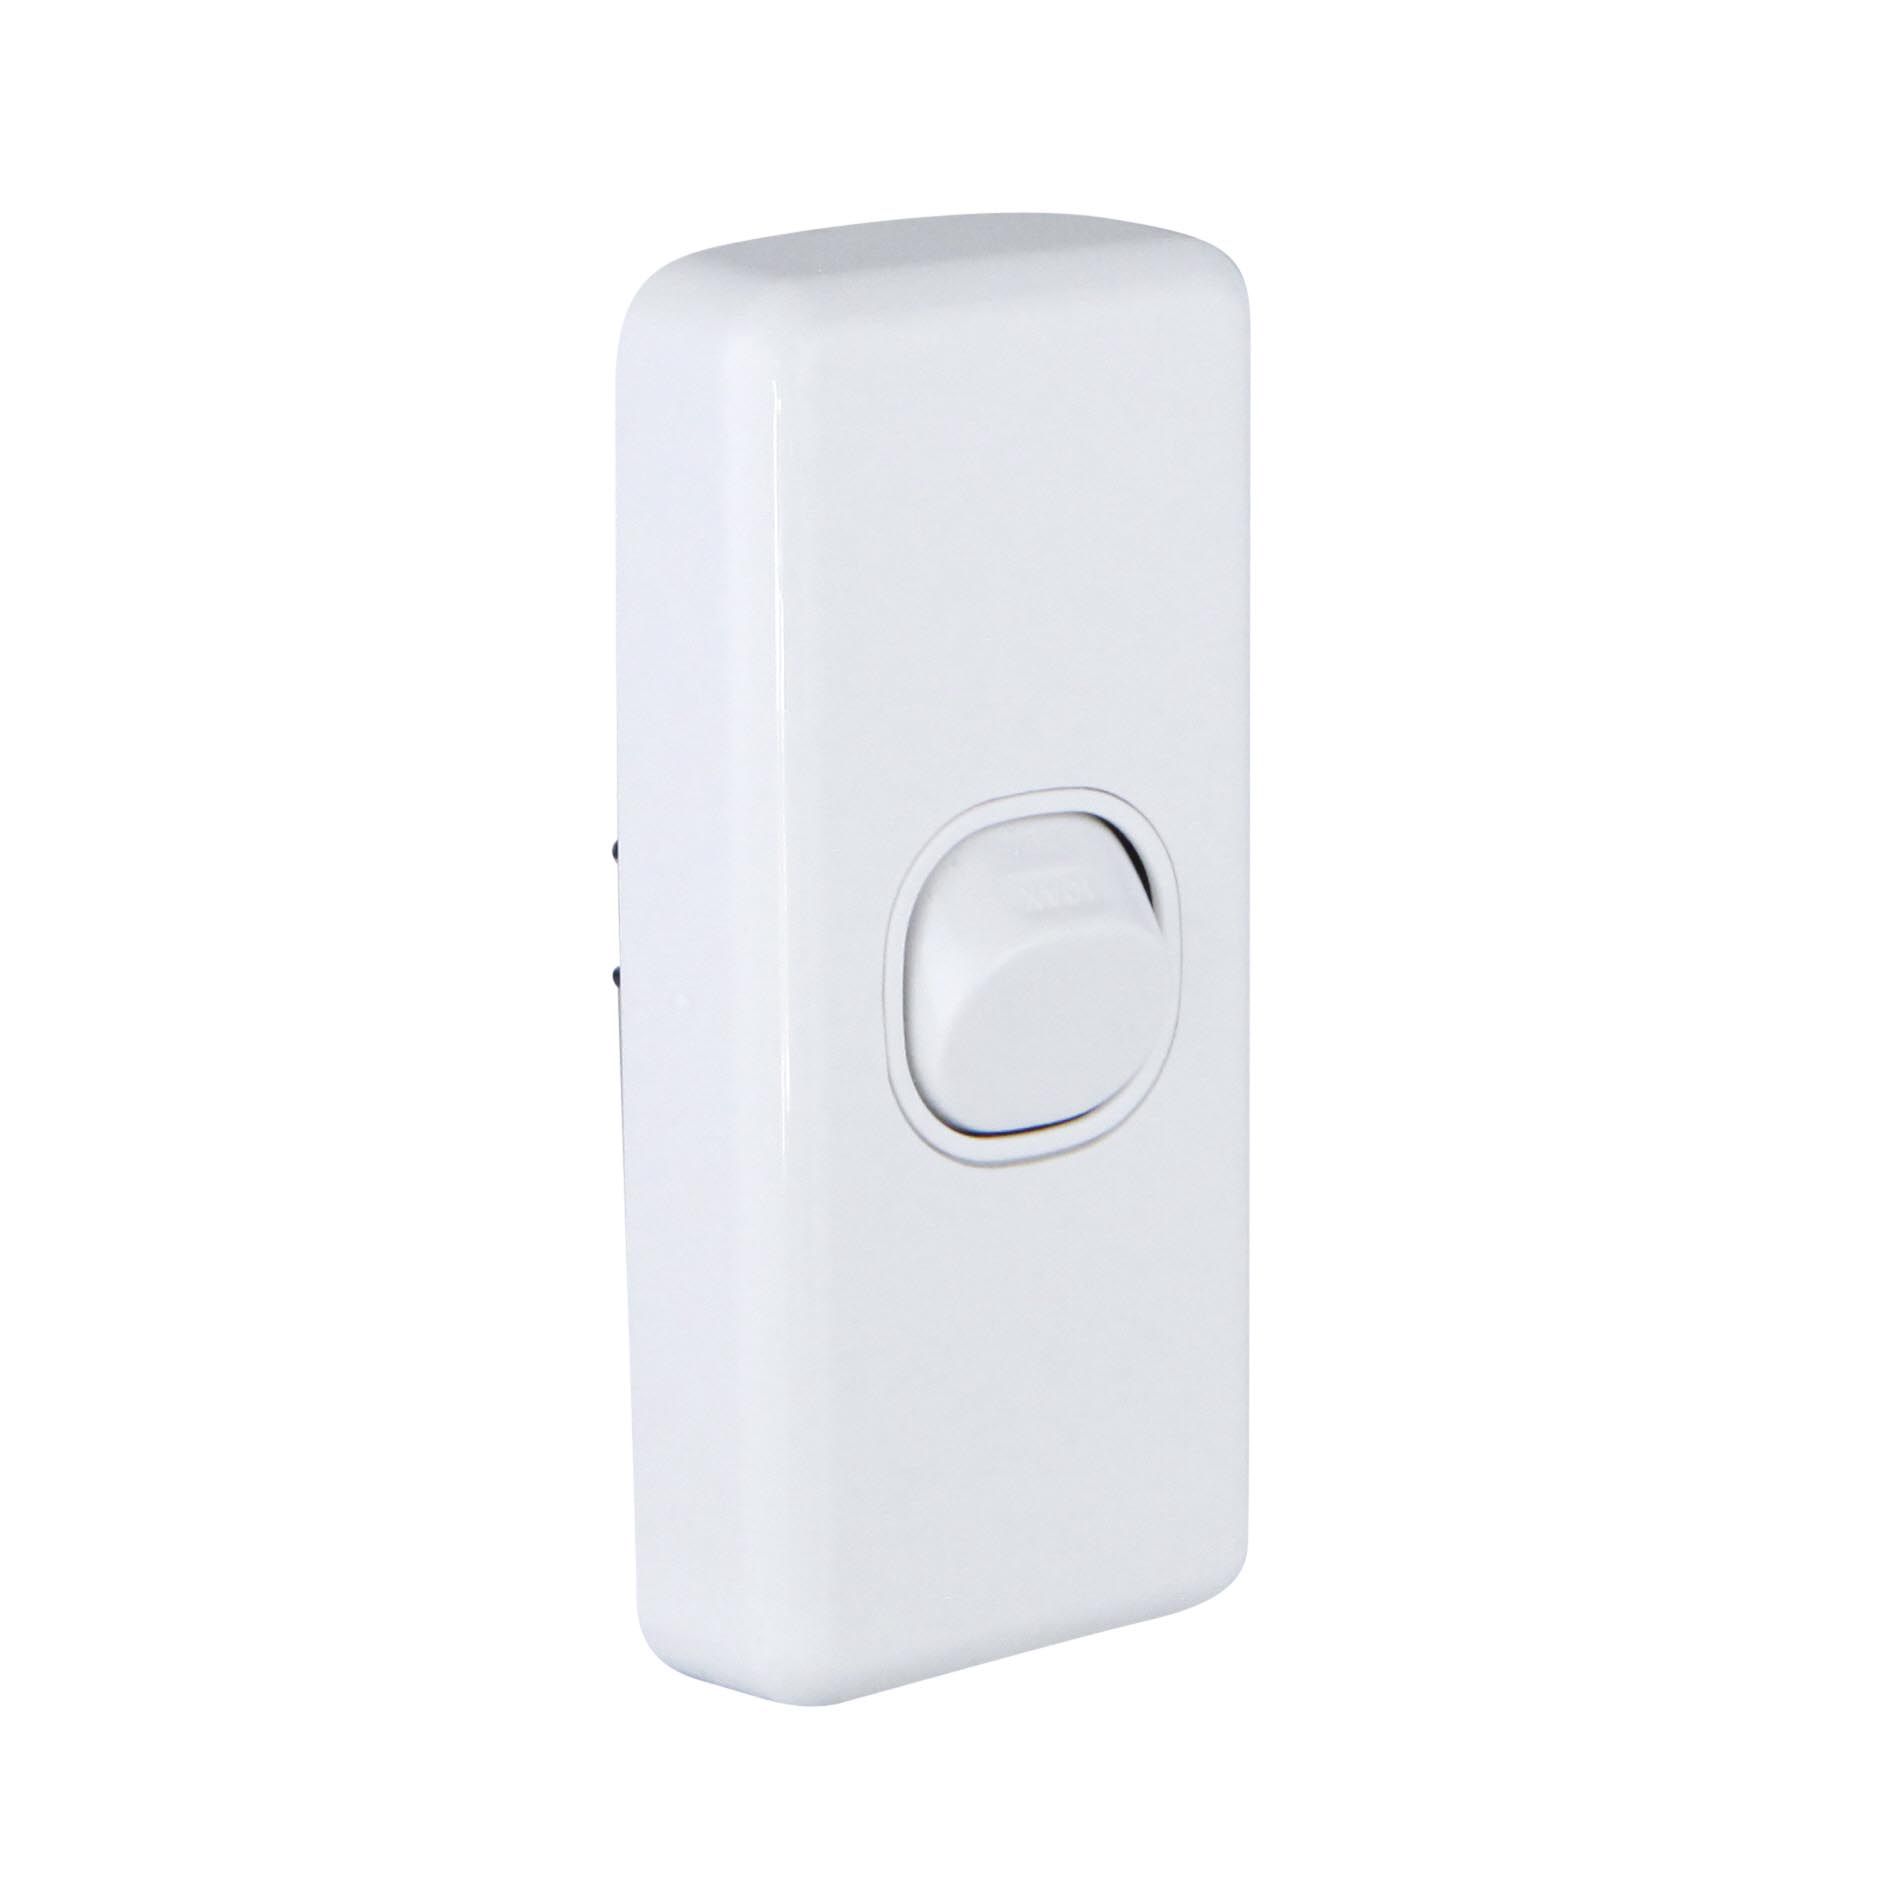 Clipsal Classic C2000 Series Single Gang Flush Light Switch 10Amp Vertical Architrave White - C2030-WE